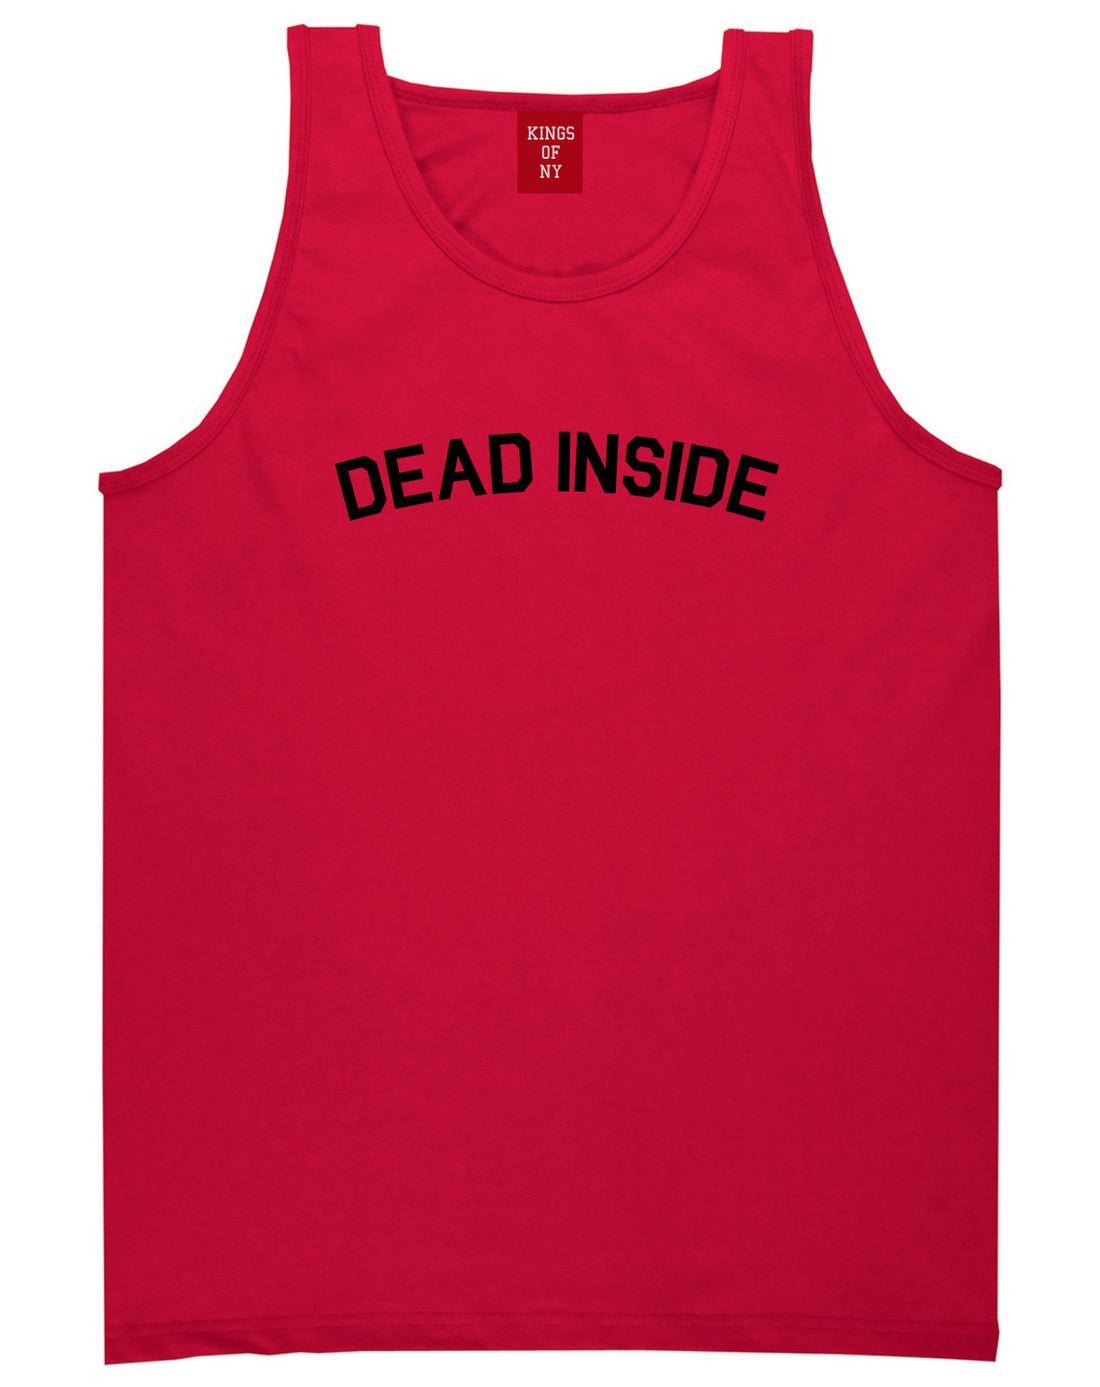 Dead Inside Arch Mens Tank Top Shirt Red by Kings Of NY